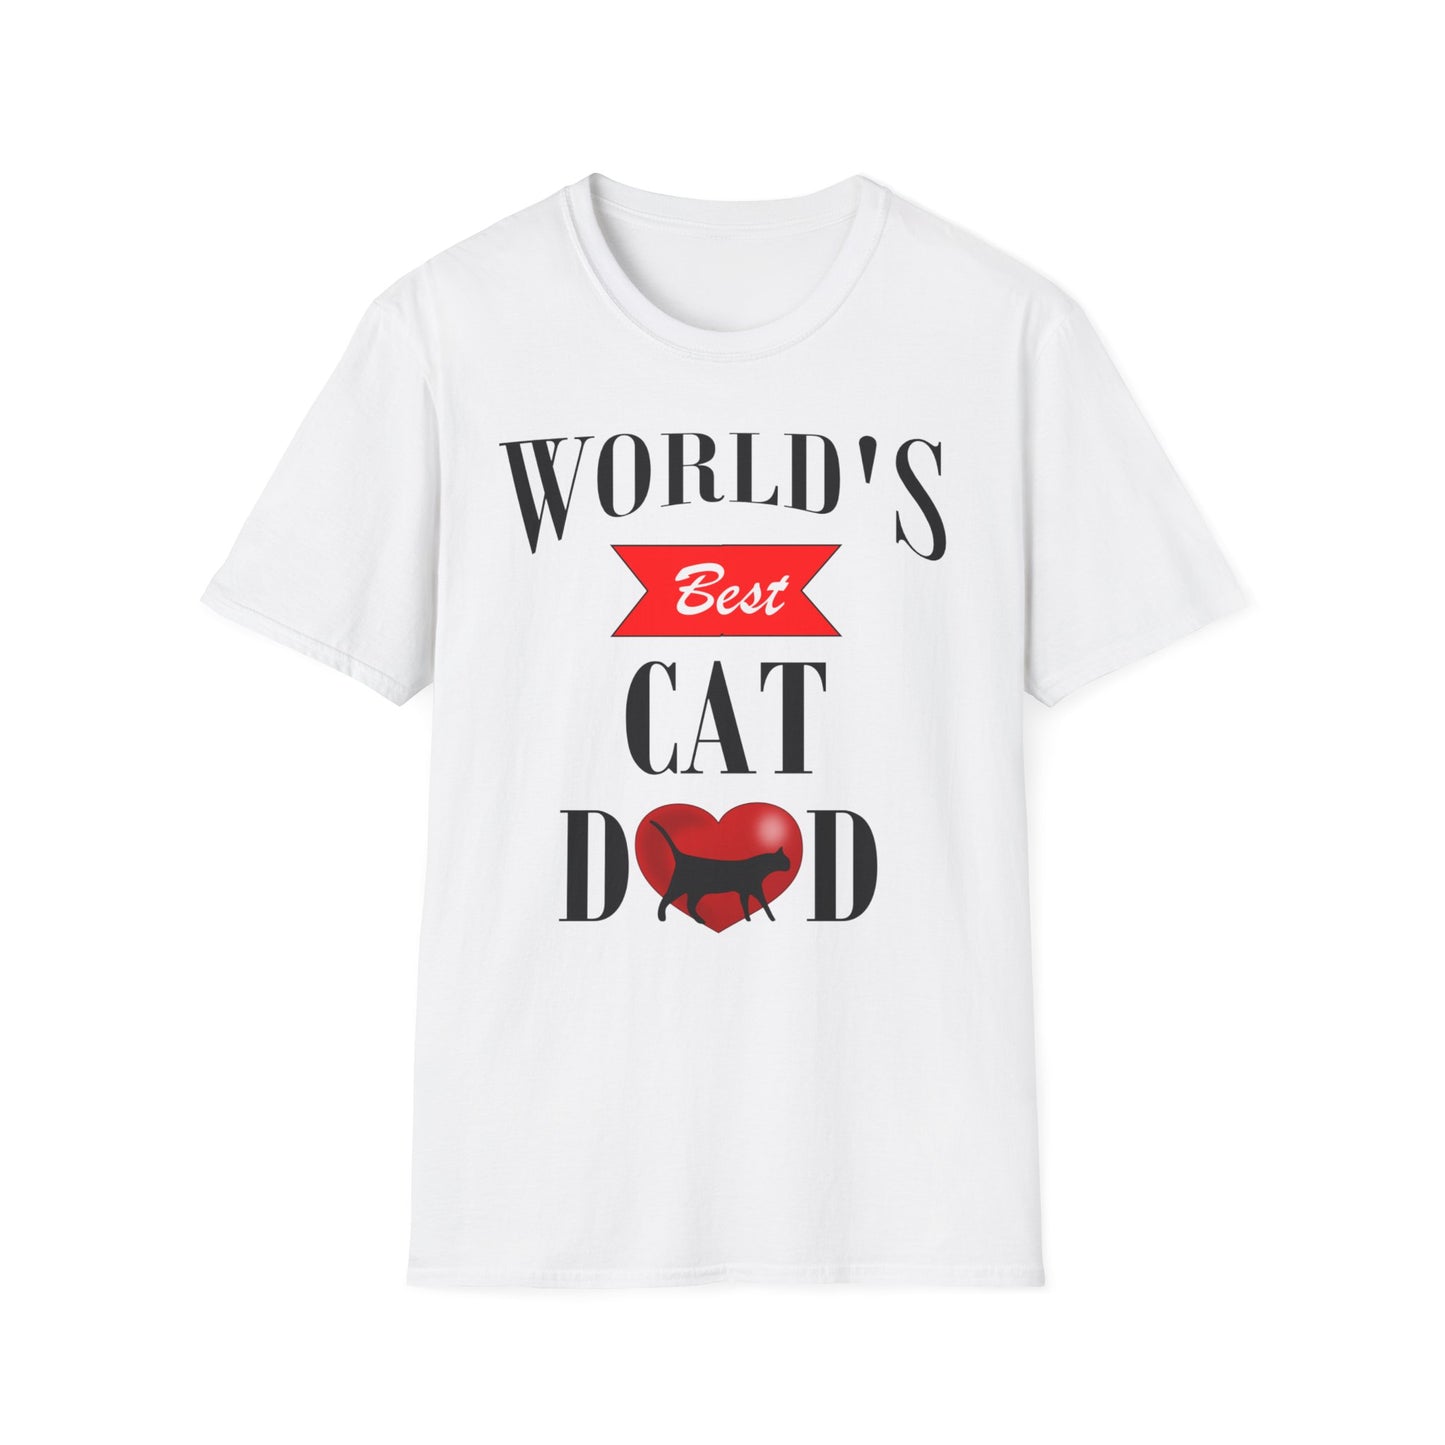 A white t-shirt with a Father's Day quote: World's Best Cat Dad. The A in Dad is a red heart and a black cat